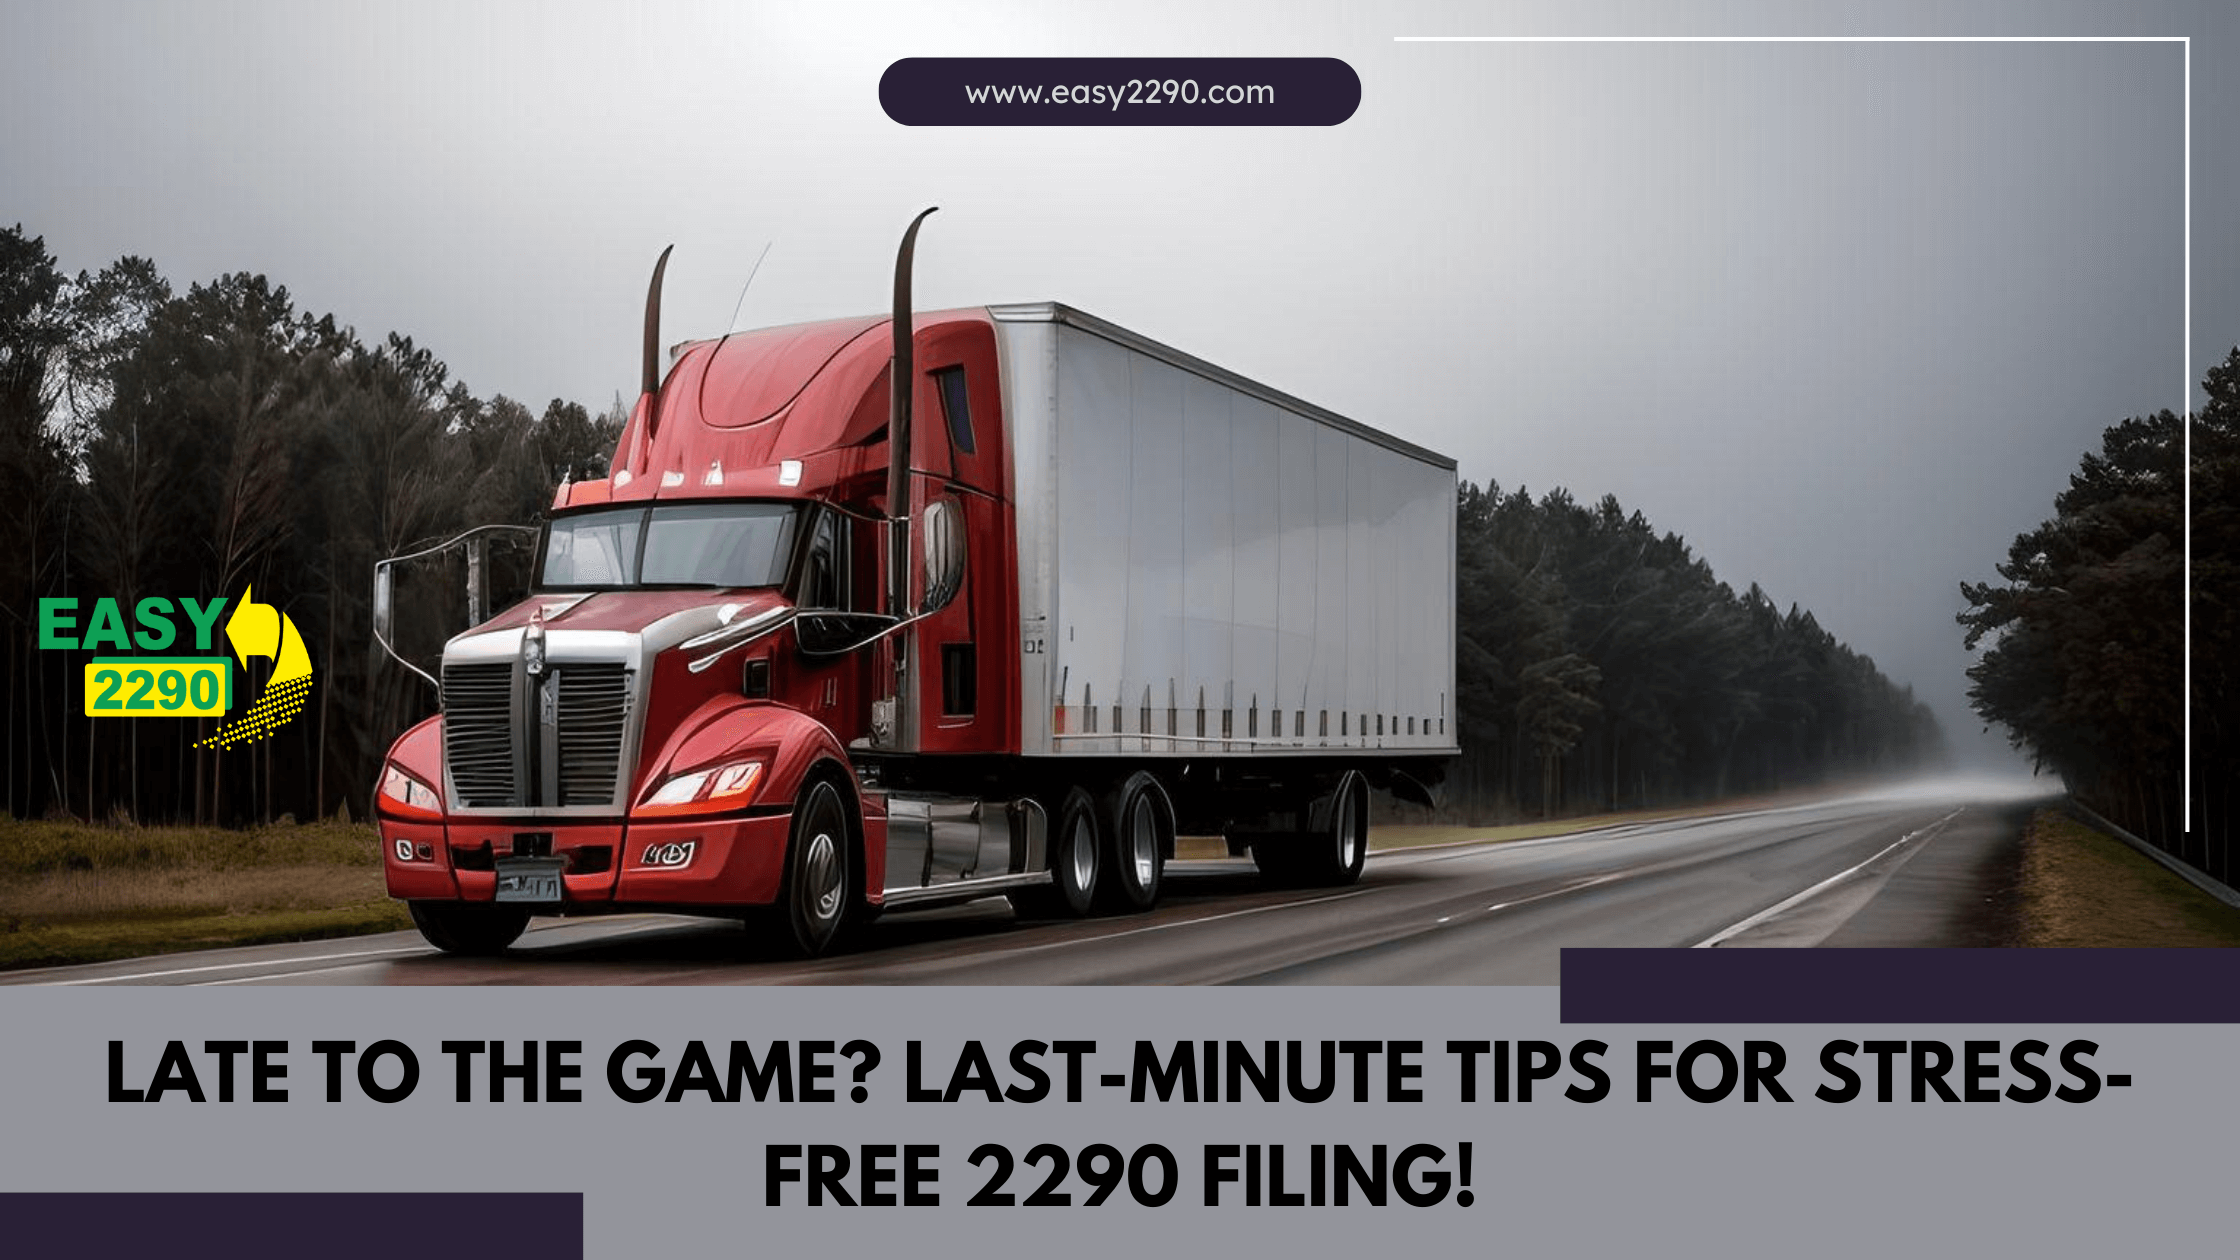 Late to the Game? Last-Minute Tips for Stress-Free 2290 Filing!